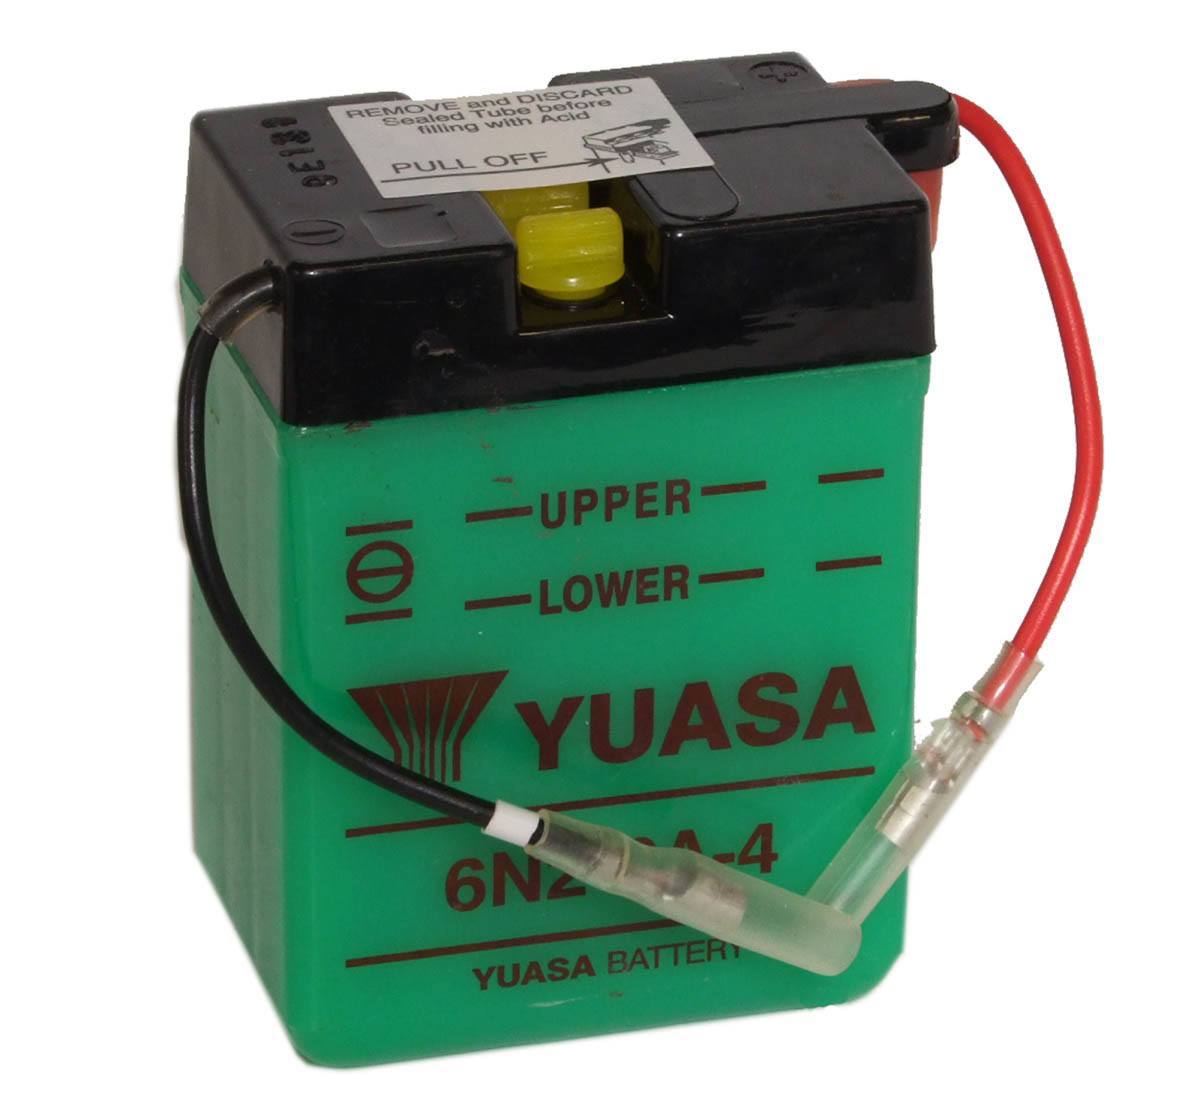 6N2-2A-4 battery from Batteryworld.ie